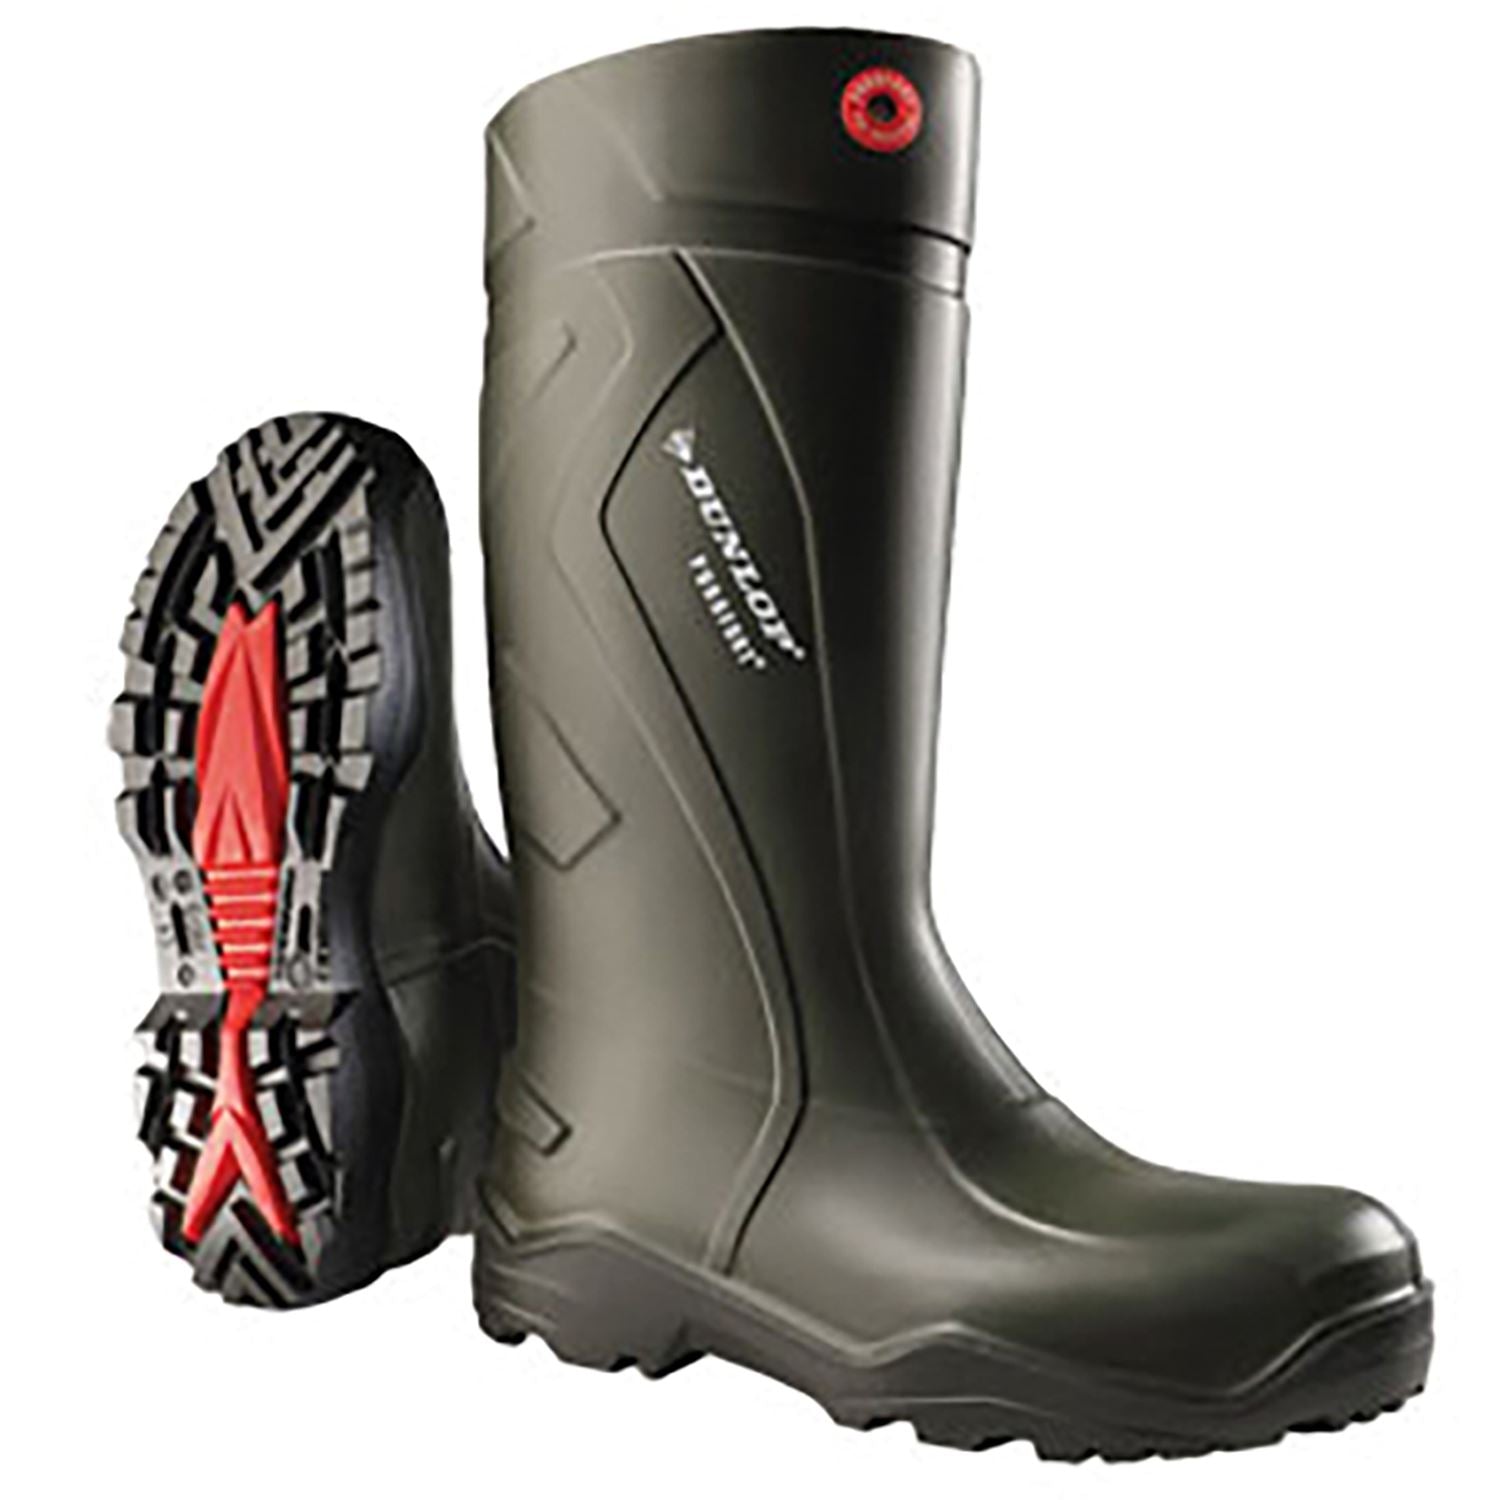 Dunlop Purofort Plus Boots - Just Horse Riders